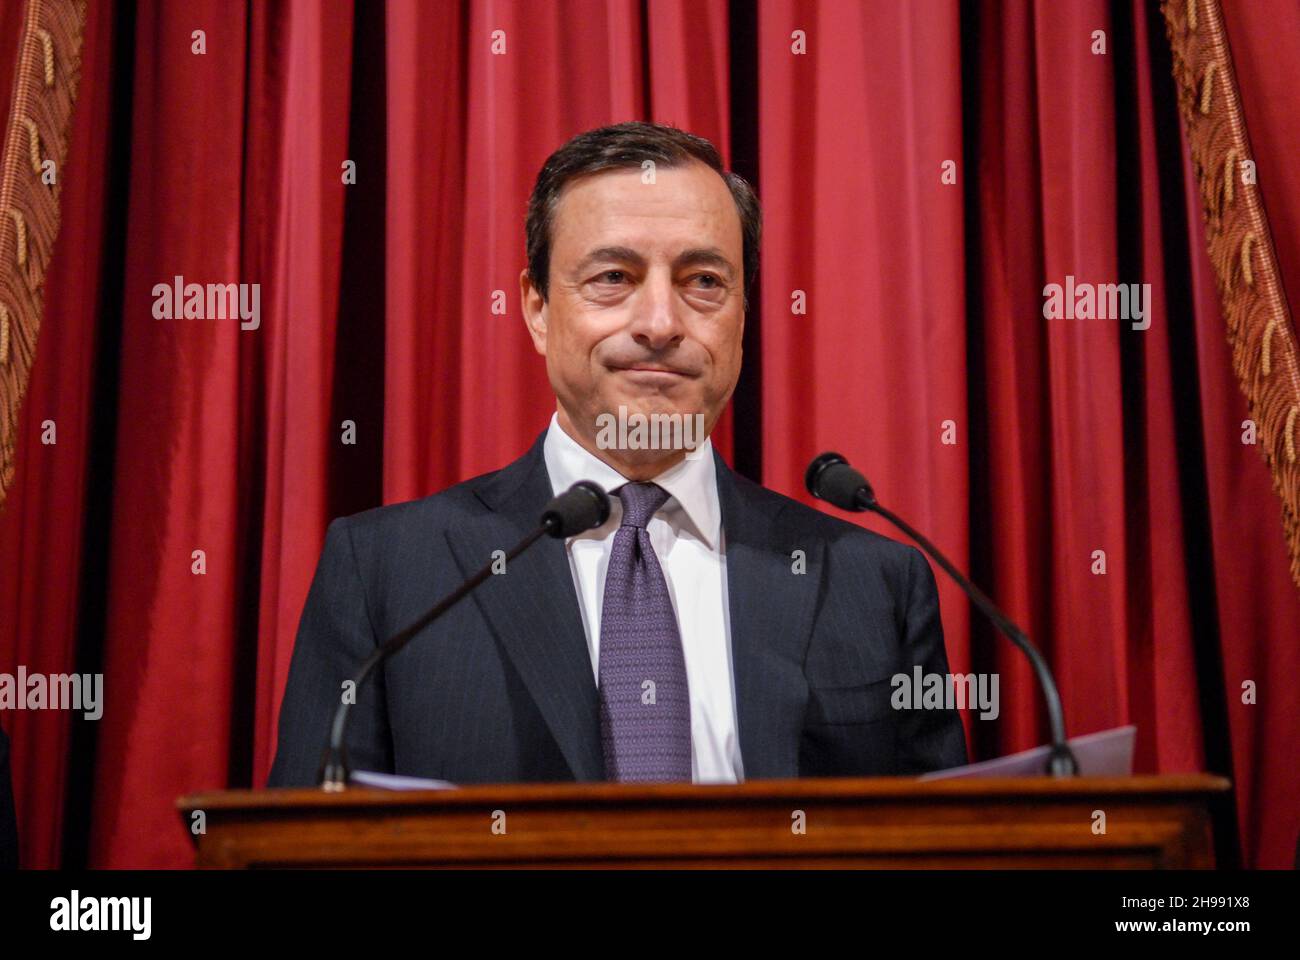 Rome, Italy 31/05/2006: General Meeting of the Bank of Italy, in the photo Mario Draghi. © Andrea Sabbadini Stock Photo